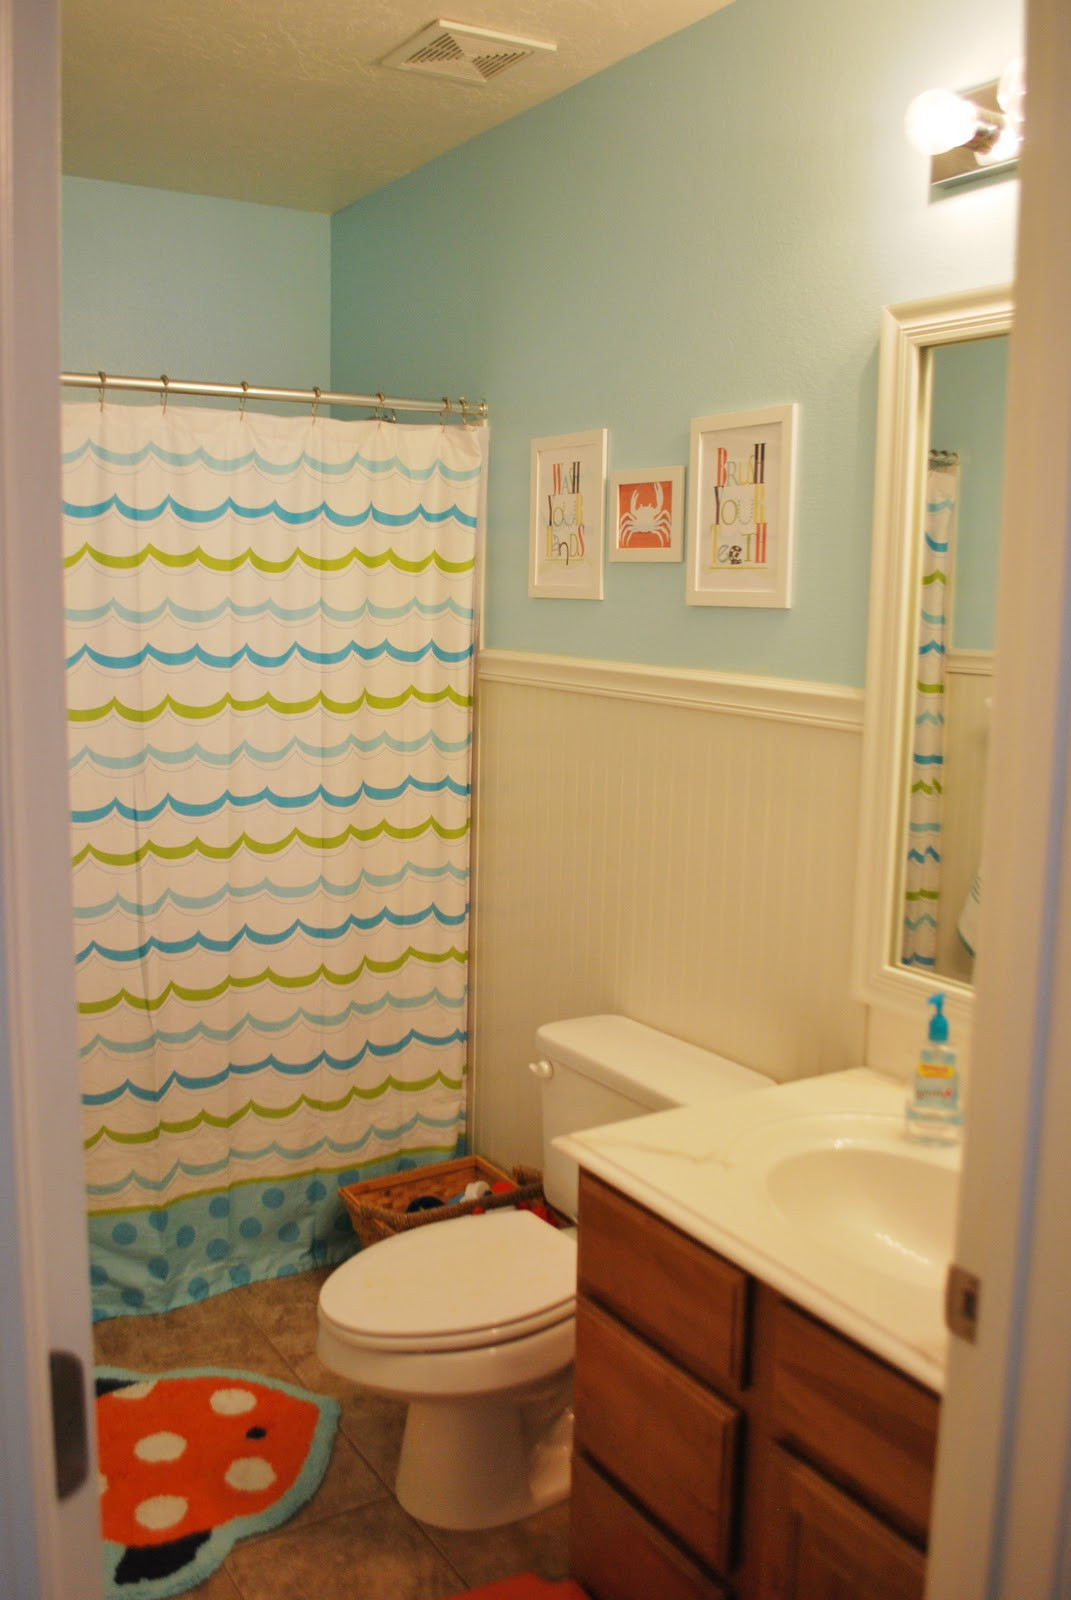 Kids Bath Decor Ideas
 Adorable Kids Bathroom Makeover by Loving Your Space